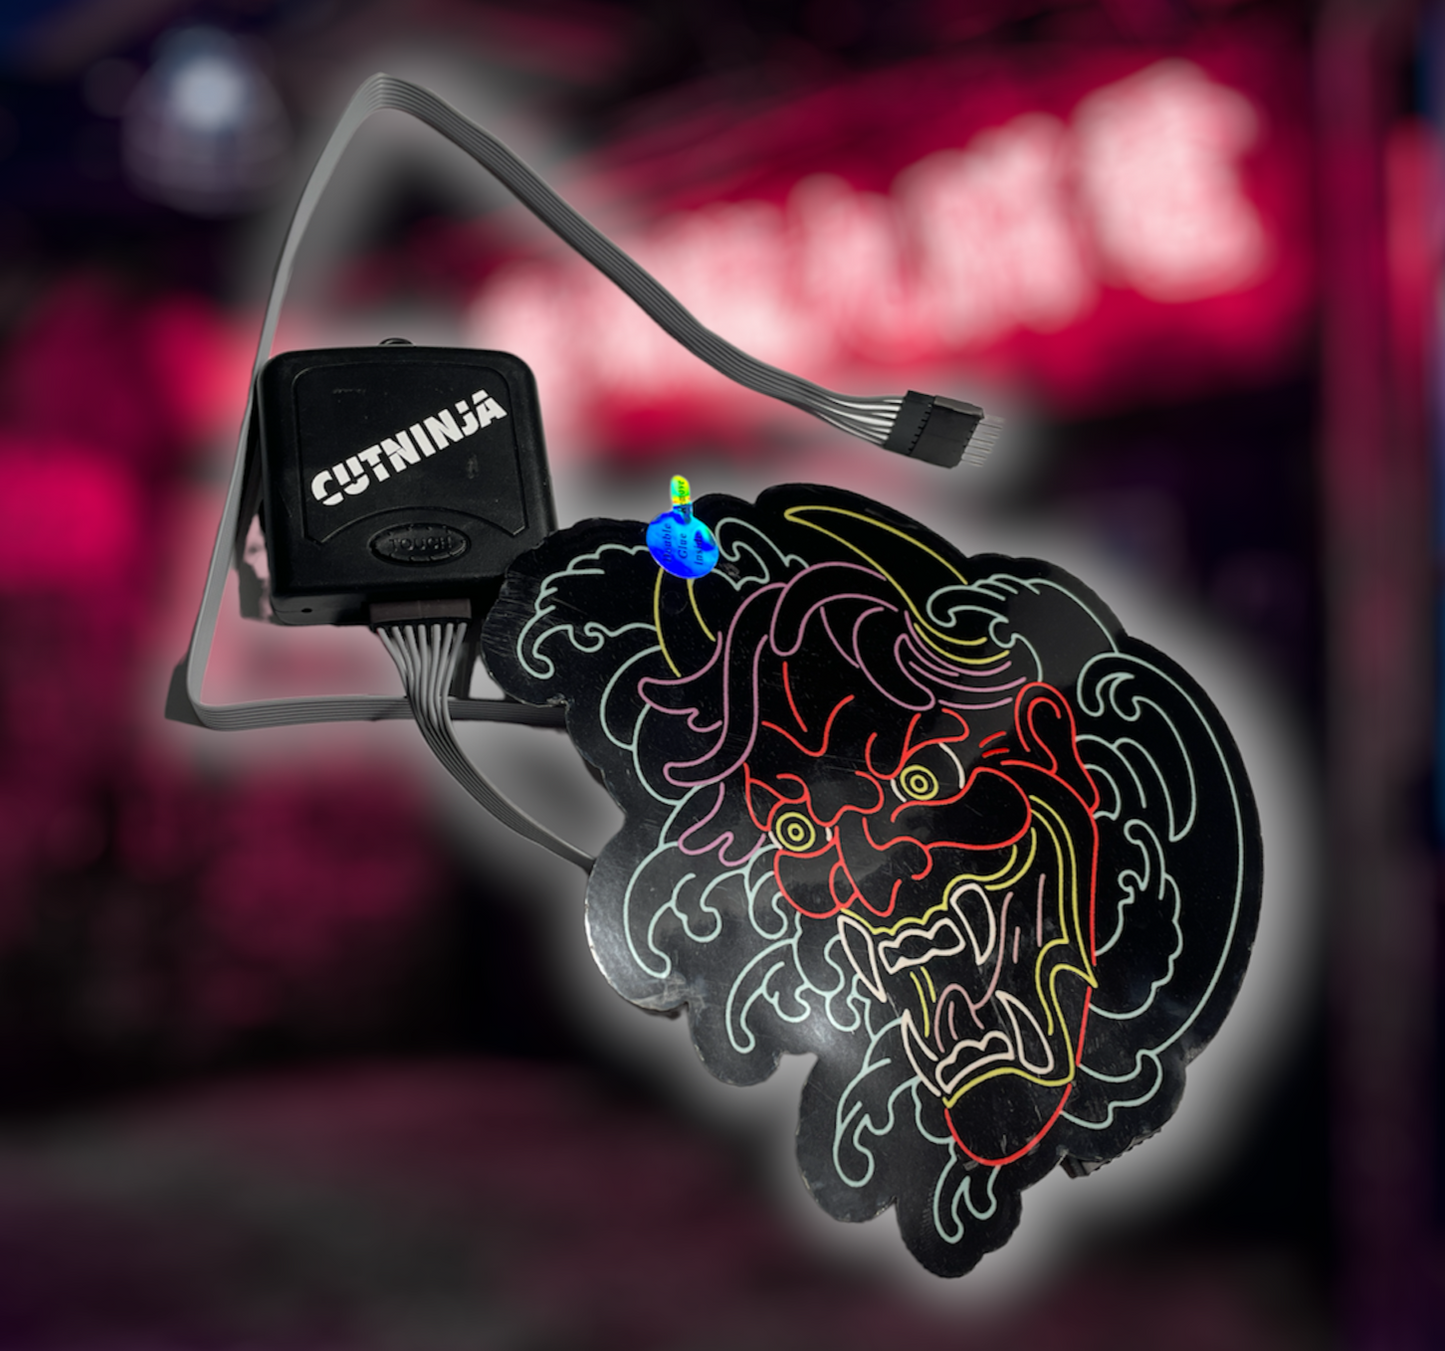 Oni Mask Electric Car Sticker by CutNinja™ - SPALAH - Collection of Glowing Led Stickers